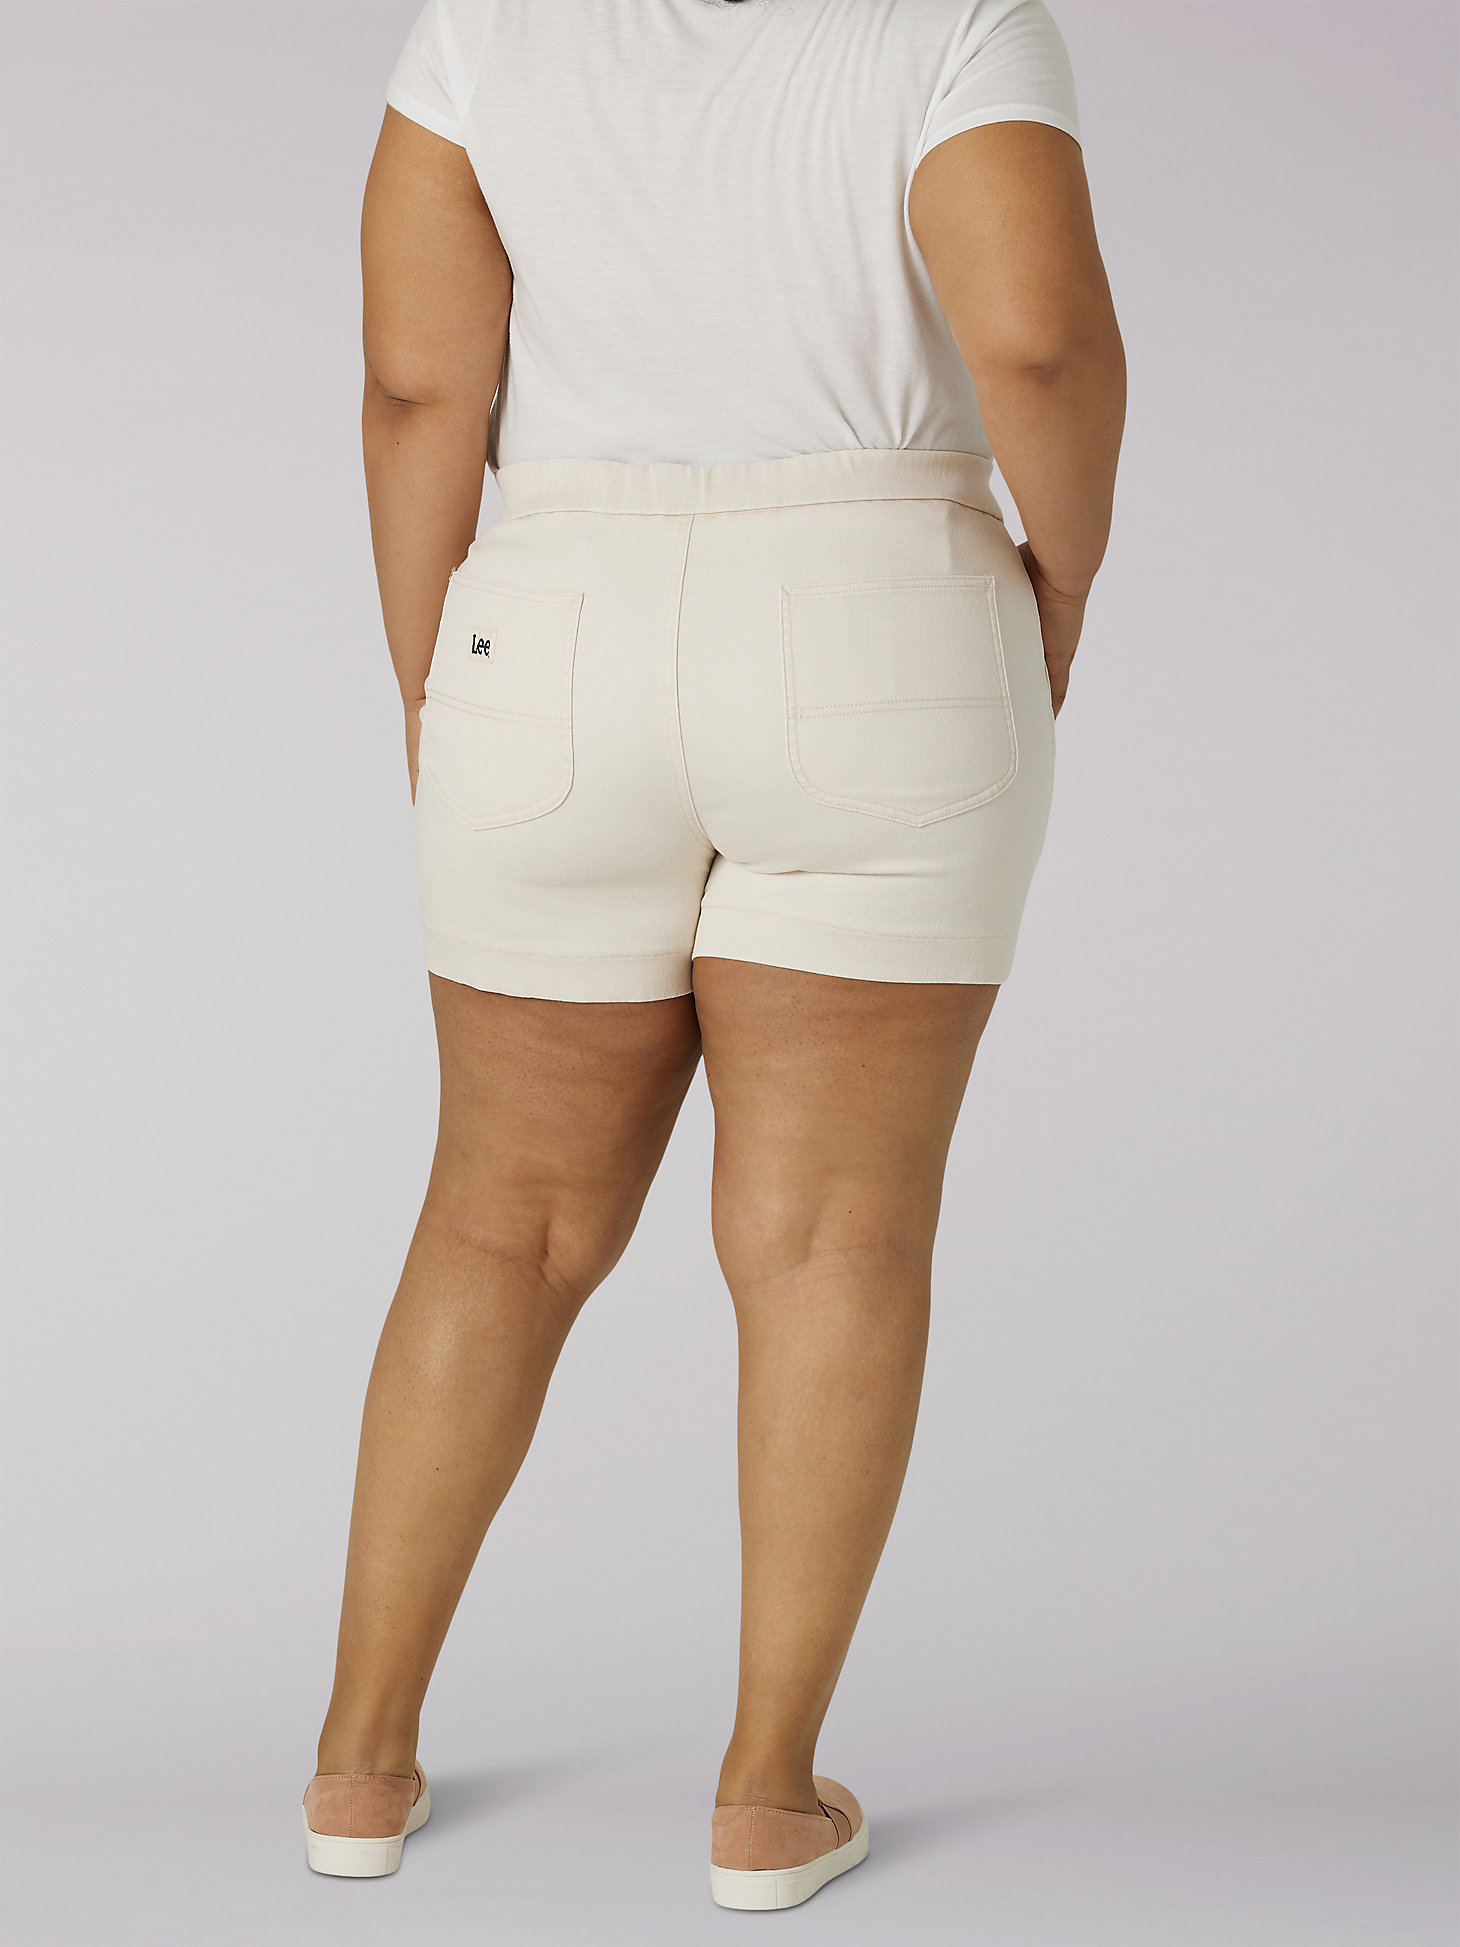 Women's Ultra Lux High Rise Pull-On Utility Short (Plus) in Whitecap Gray alternative view 1